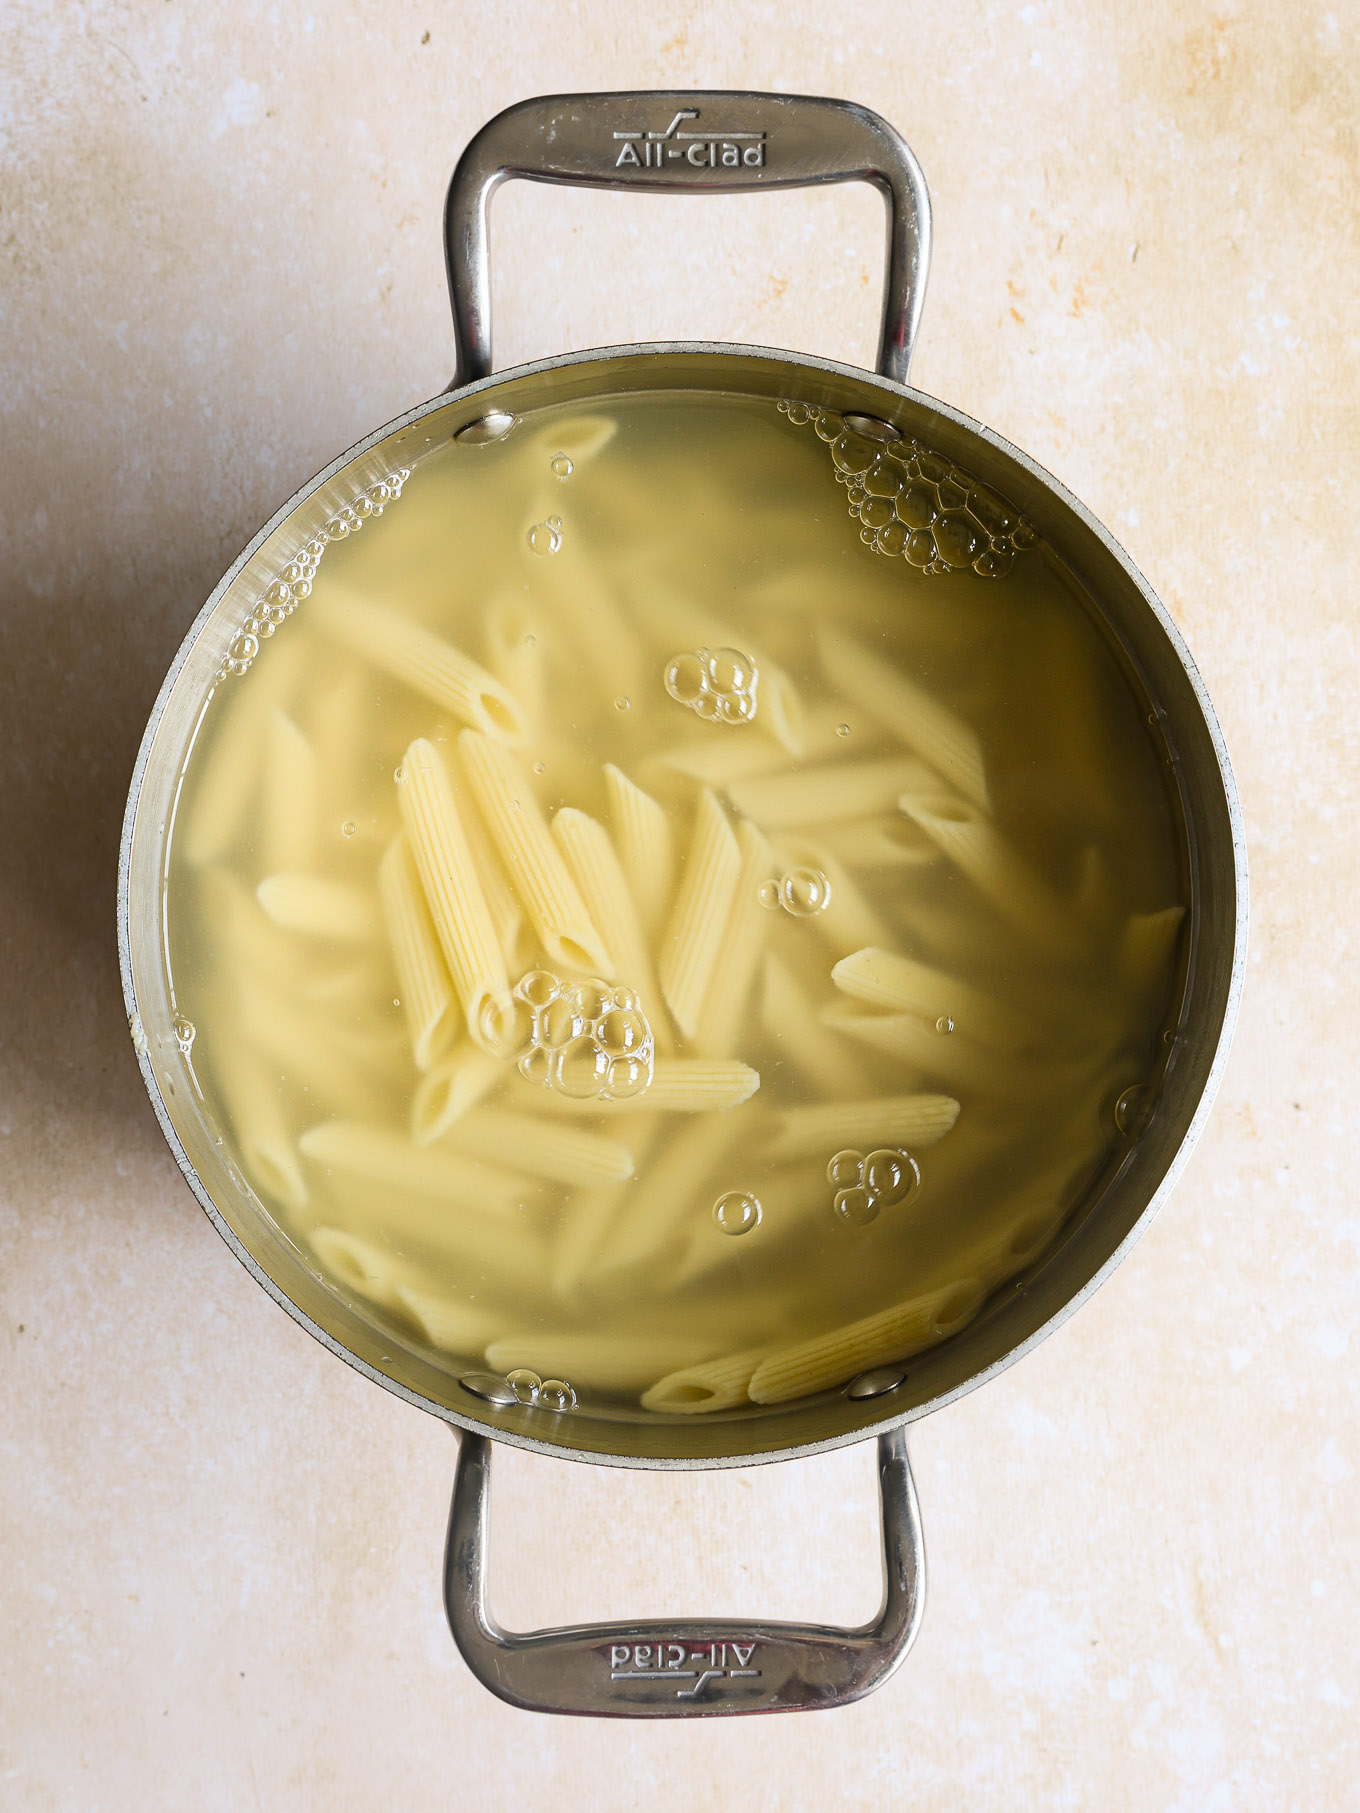 cooked pasta in a pot.